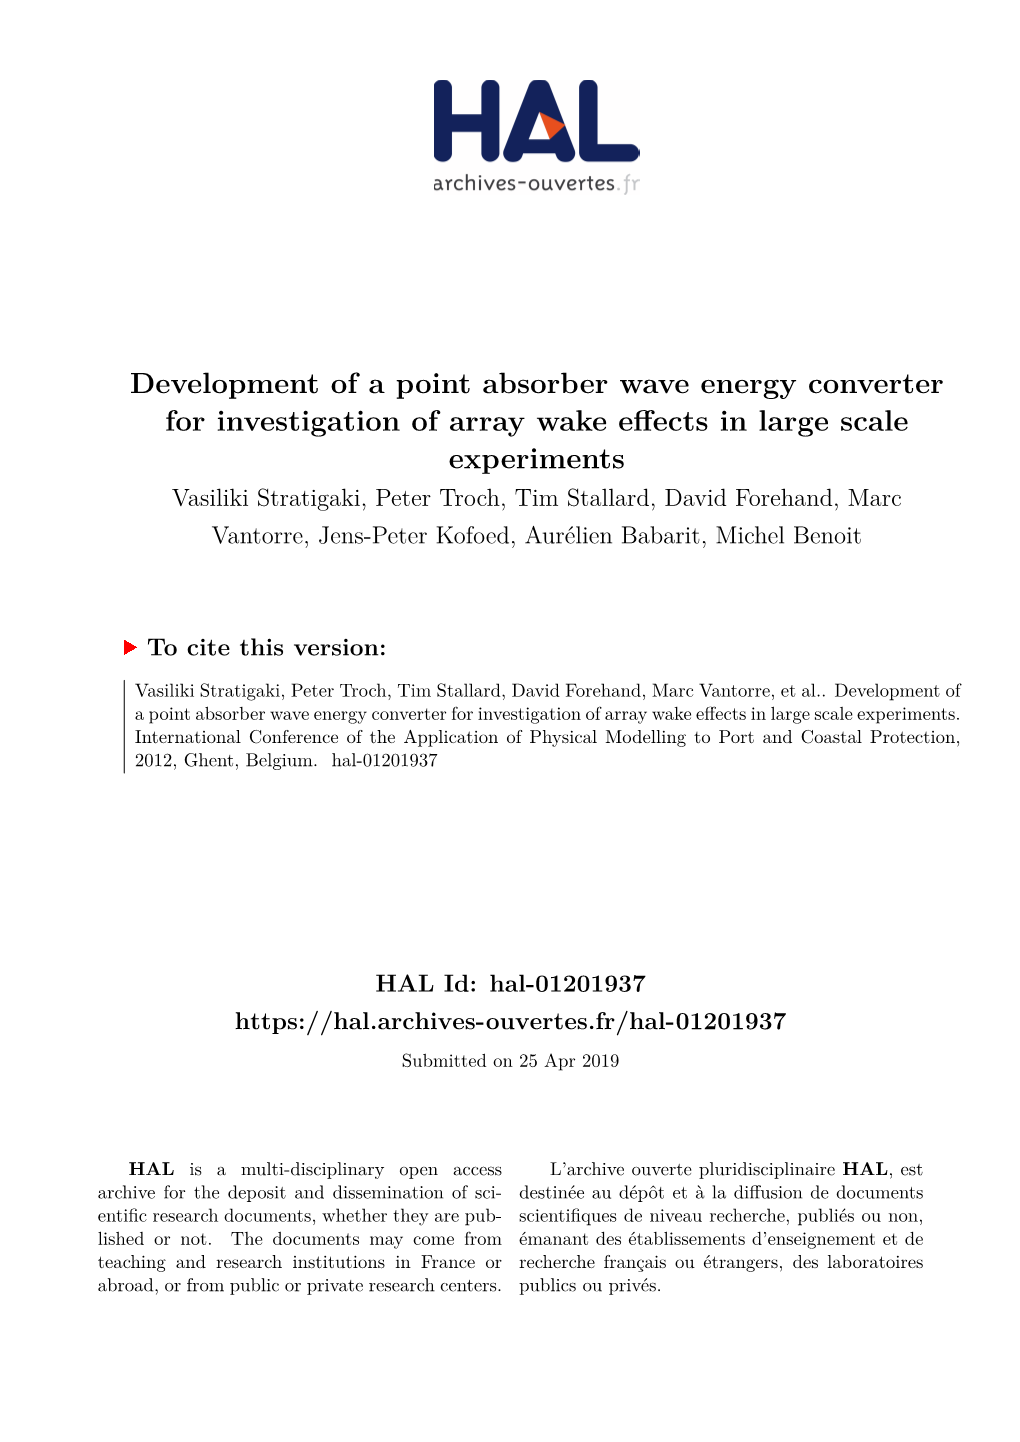 Development of a Point Absorber Wave Energy Converter for Investigation of Array Wake Effects in Large Scale Experiments